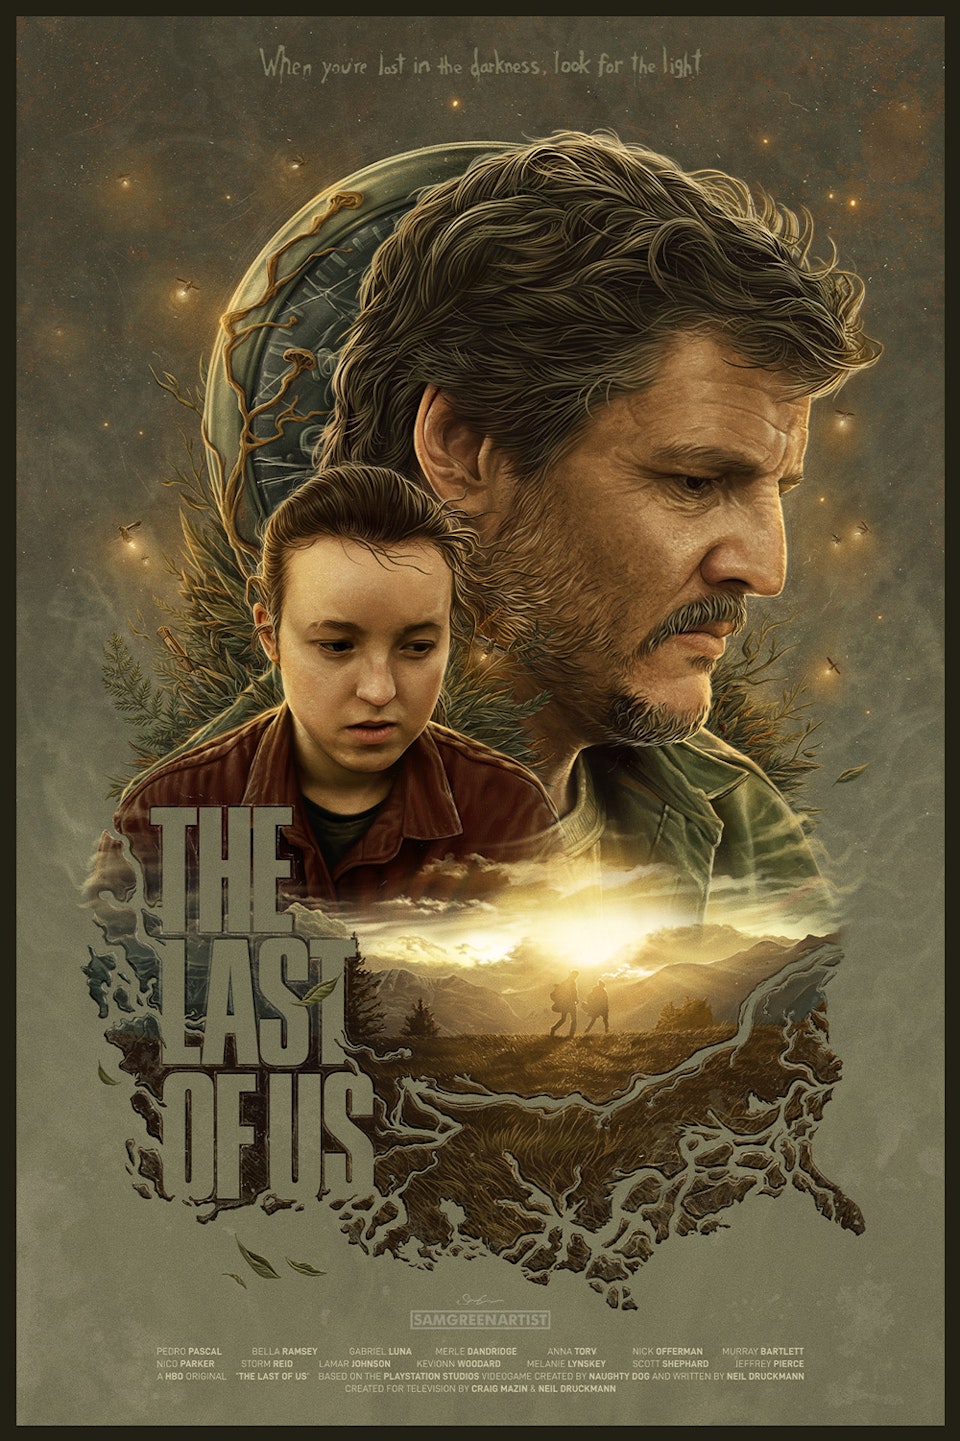 The Last of Us (HBO Series) - The Last of Us (HBO Series) - Poster illustration

Painted in Procreate

Originally created as a pencil drawing at the end of 2022, I decided to develop the concept further into a full digital illustration. 

Joel's cracked watch looms over him, representing the death of Sarah and how that lingers heavily over his life. Ellie and Joel fade into each other, showing the interwoven nature of their relationship.

Silhouetted by light and positioned in Joel's heart is him and Ellie – the relationship that provides him with a very literal light in his life and the hope to go forward.

The plants surrounding them ties into the overgrowth that the world is faced with after the outbreak, with the fireflies buzzing around them representing the group of the same name. Nestled amongst the overgrowth is Ellie’s switchblade, as well as a couple of other small nods. Small pieces of cordyceps can be seen amongst the leaves, with a large mass of it taking hold on the face of Joel’s watch – showing the spread of the virus over time.

Finally, creeping in from the negative space is the shape of the cordyceps virus, creating the shape of the map of the USA, where Joel and Ellie’s journey takes place. That very journey is shown with a tendril of the virus creeping in from the east coast, following the route across the map that they take over the course of the show.